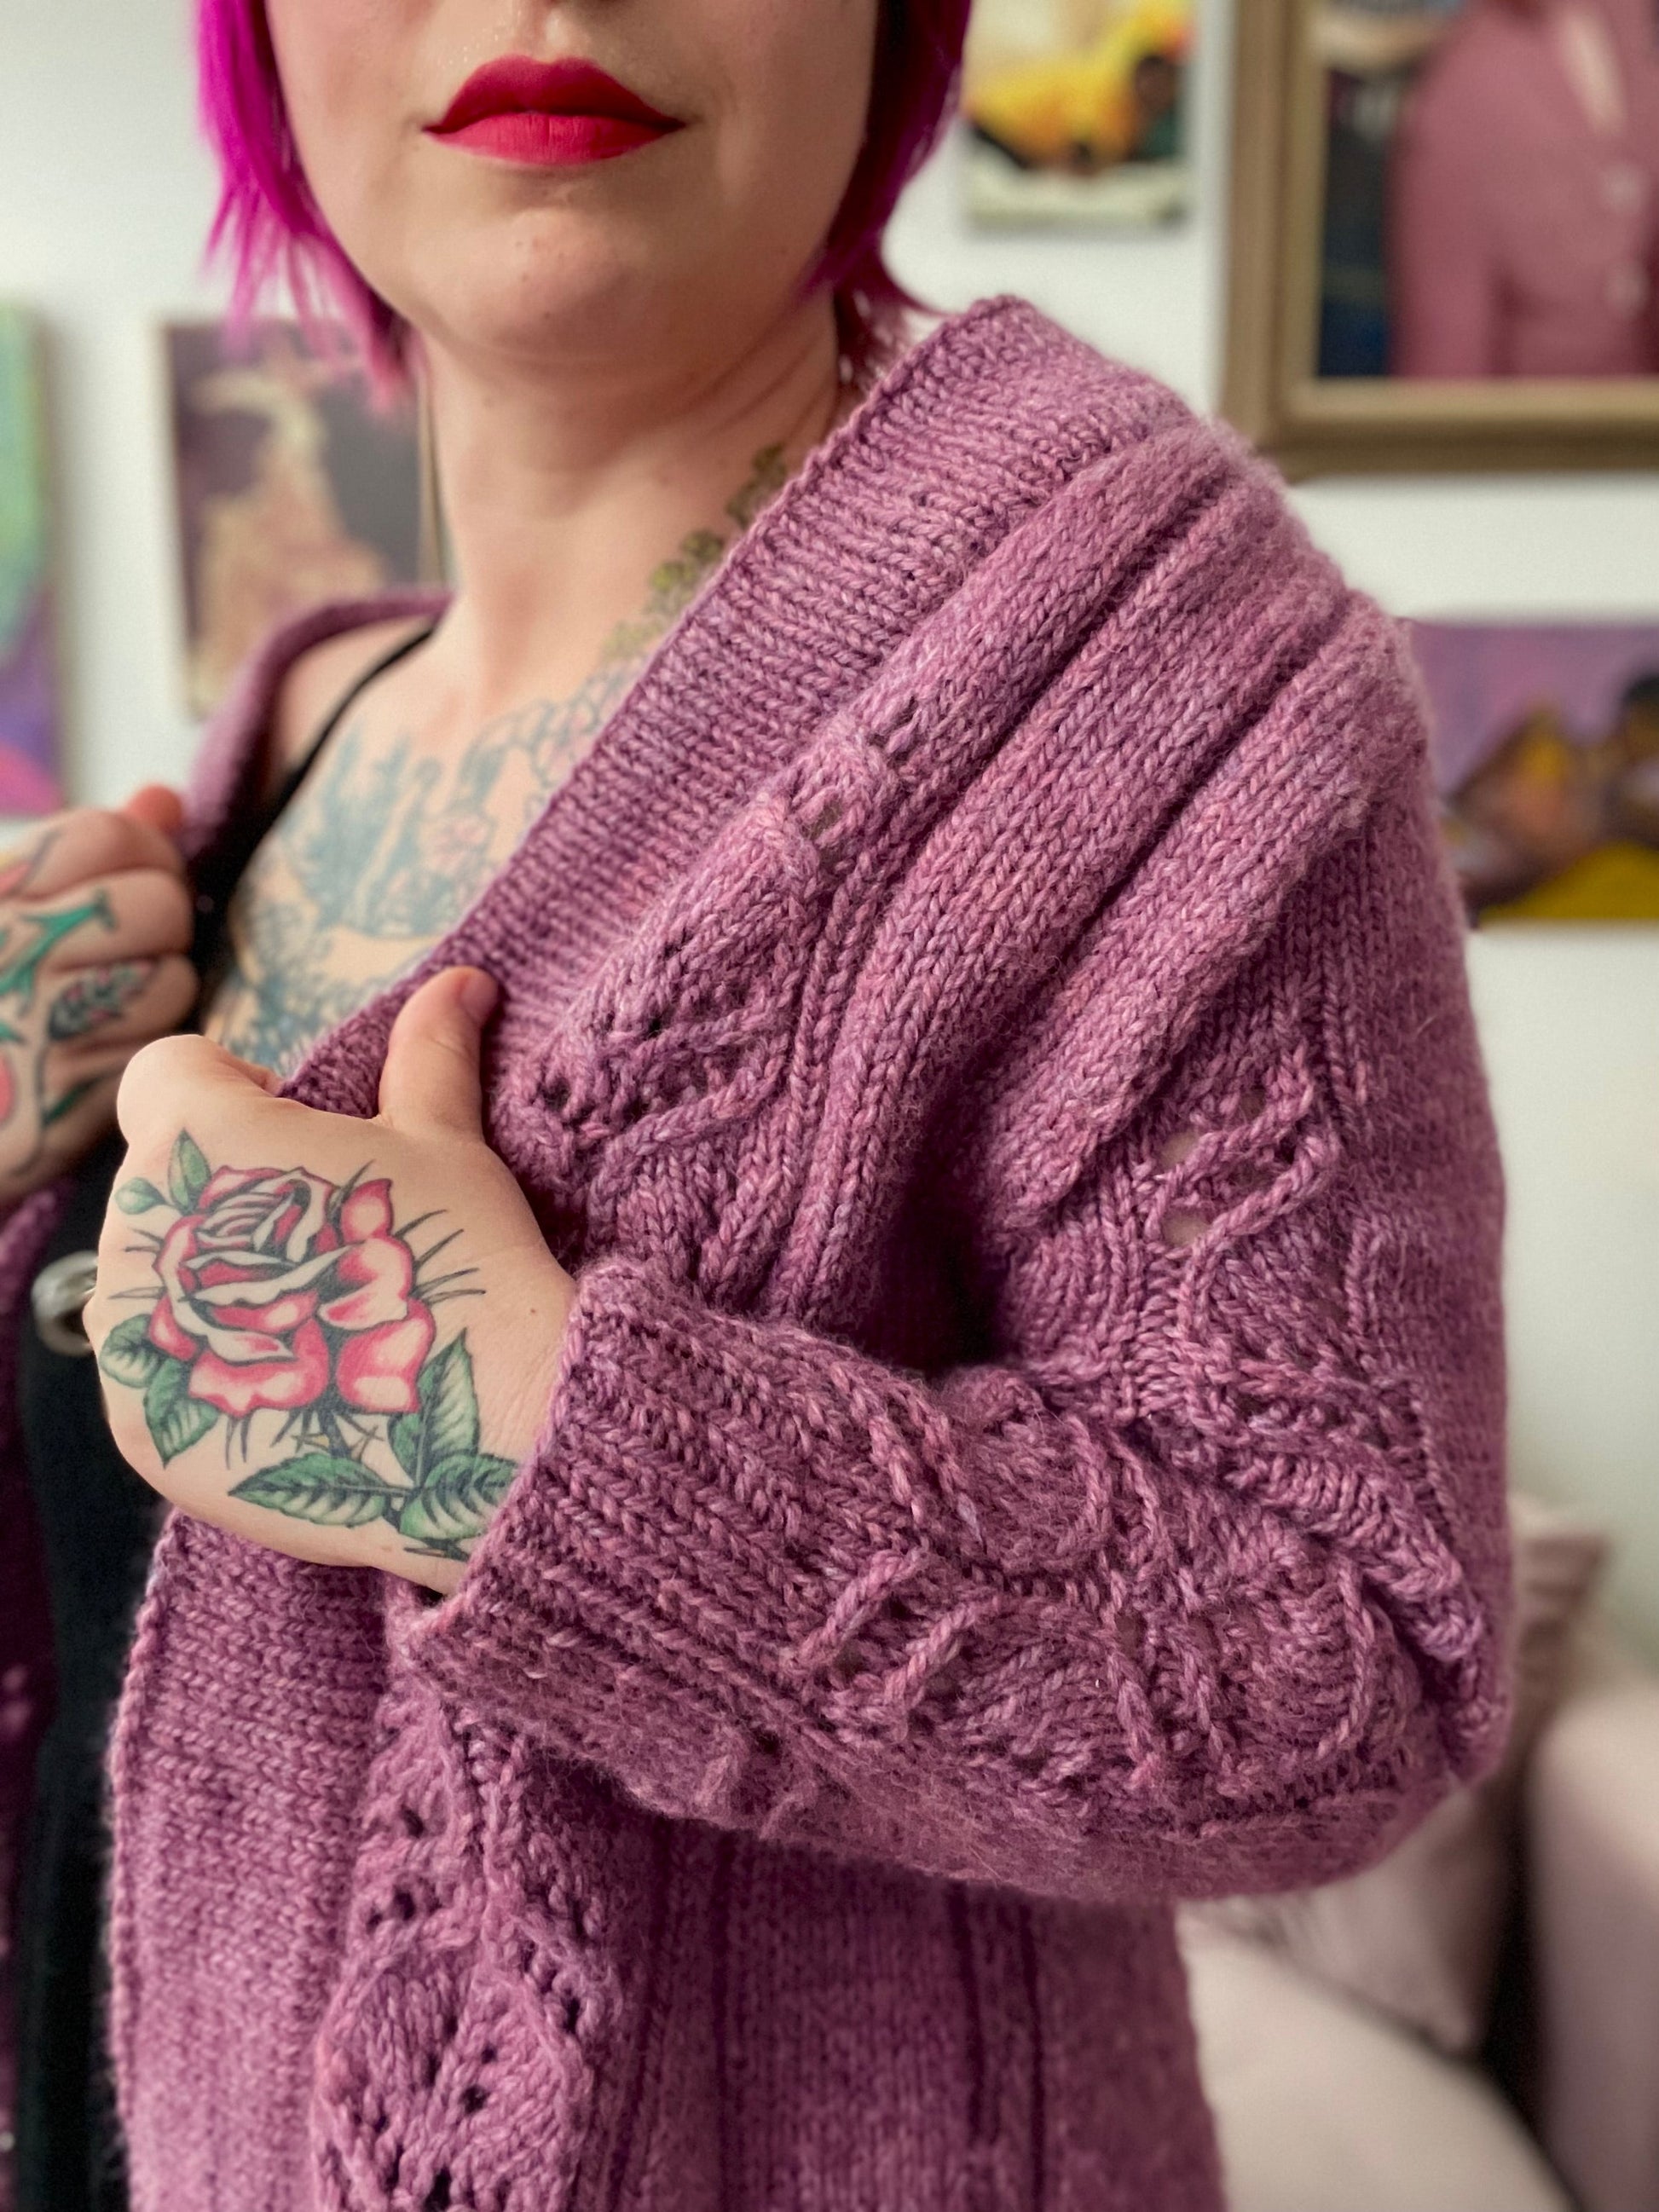 Seen from the neck down, Bess holds the ribbed edges of her light pink cardigan. Knit with bulky yarn, the cardigan features lace panels down the fronts and sleeves. Paintings hanging on a wall can be seen in the background.